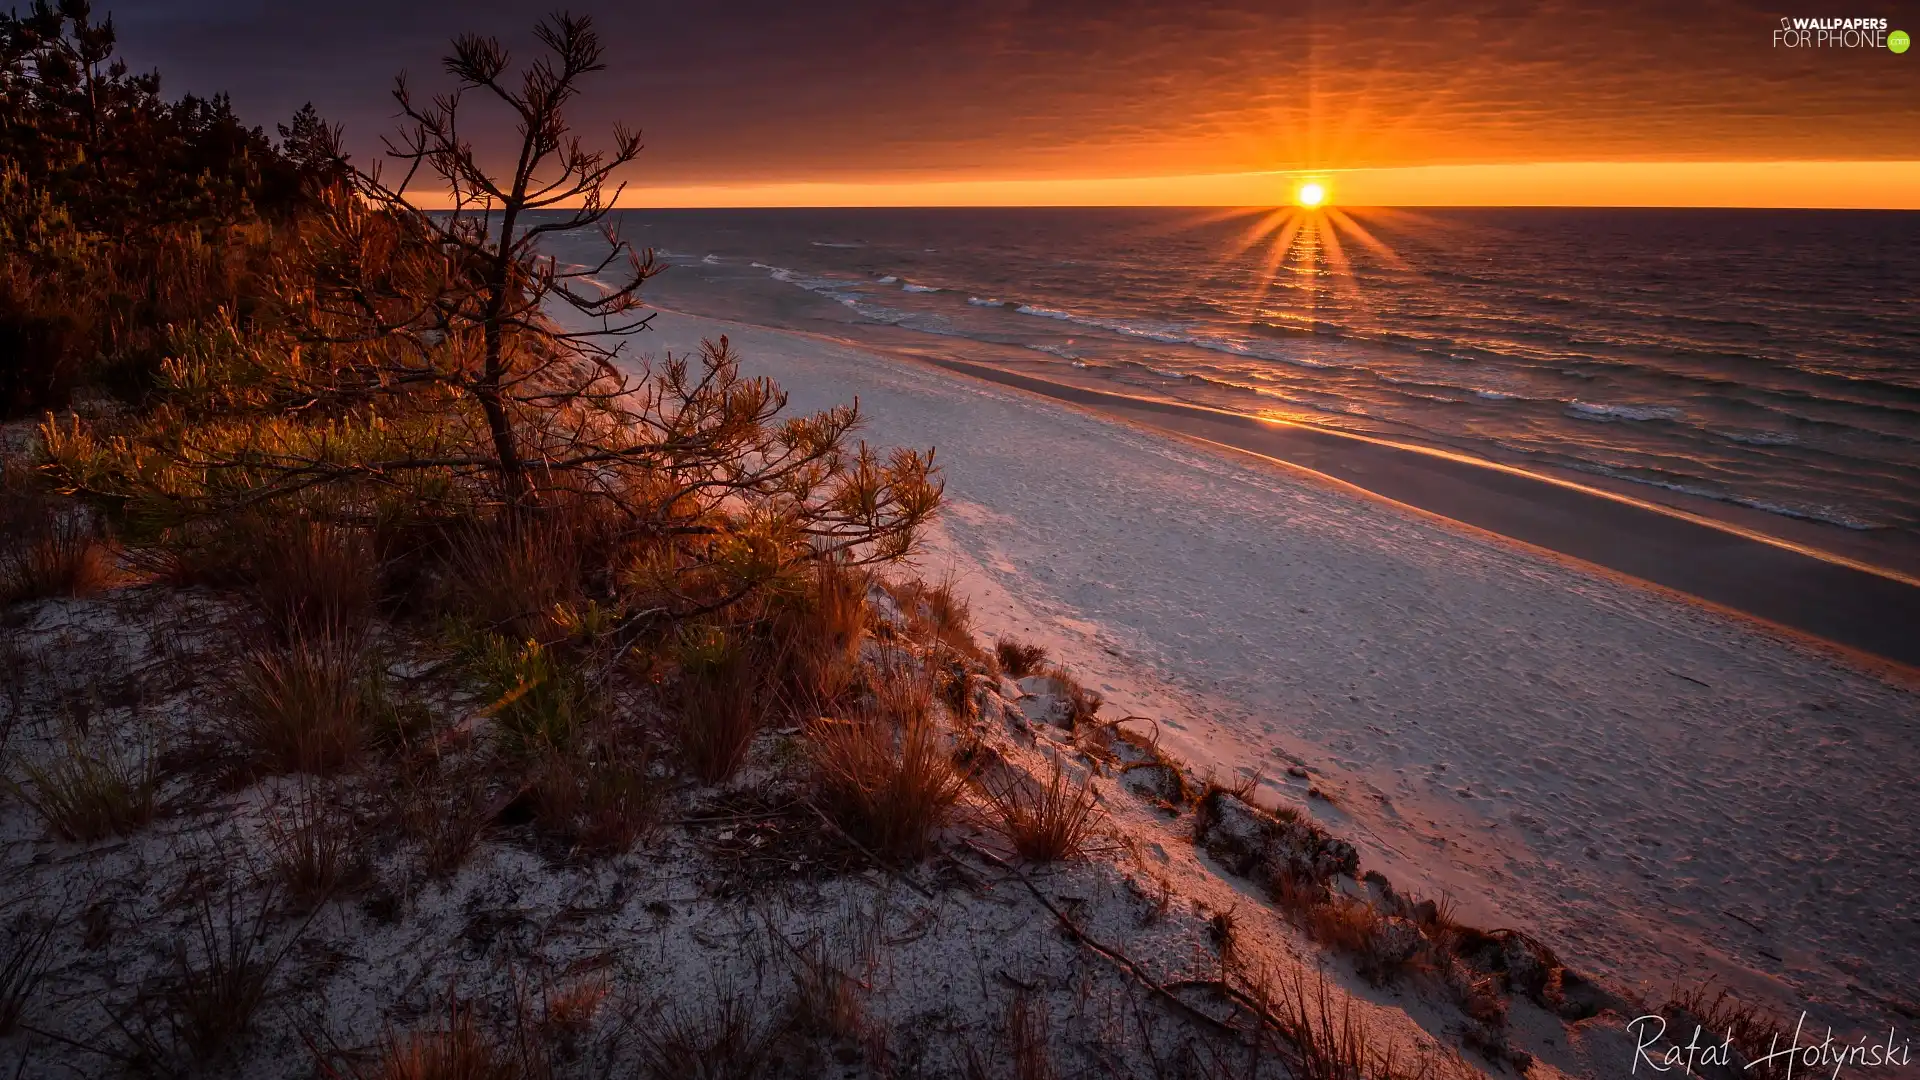 Plants, Poland, Baltic Sea, Great Sunsets, Beaches